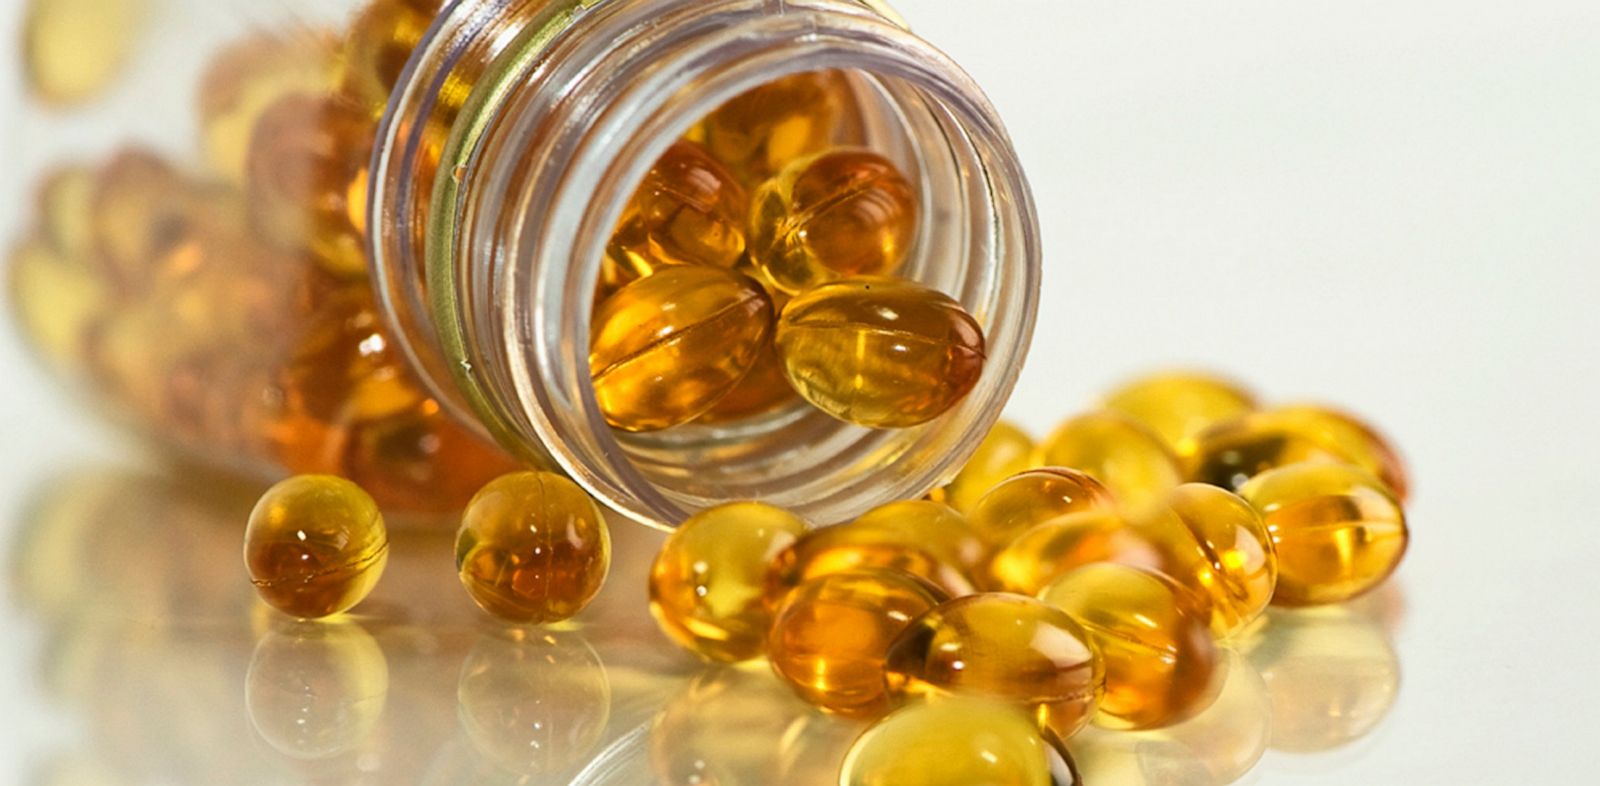 Neccessity of Fish Oil Supplements Debated - ABC News